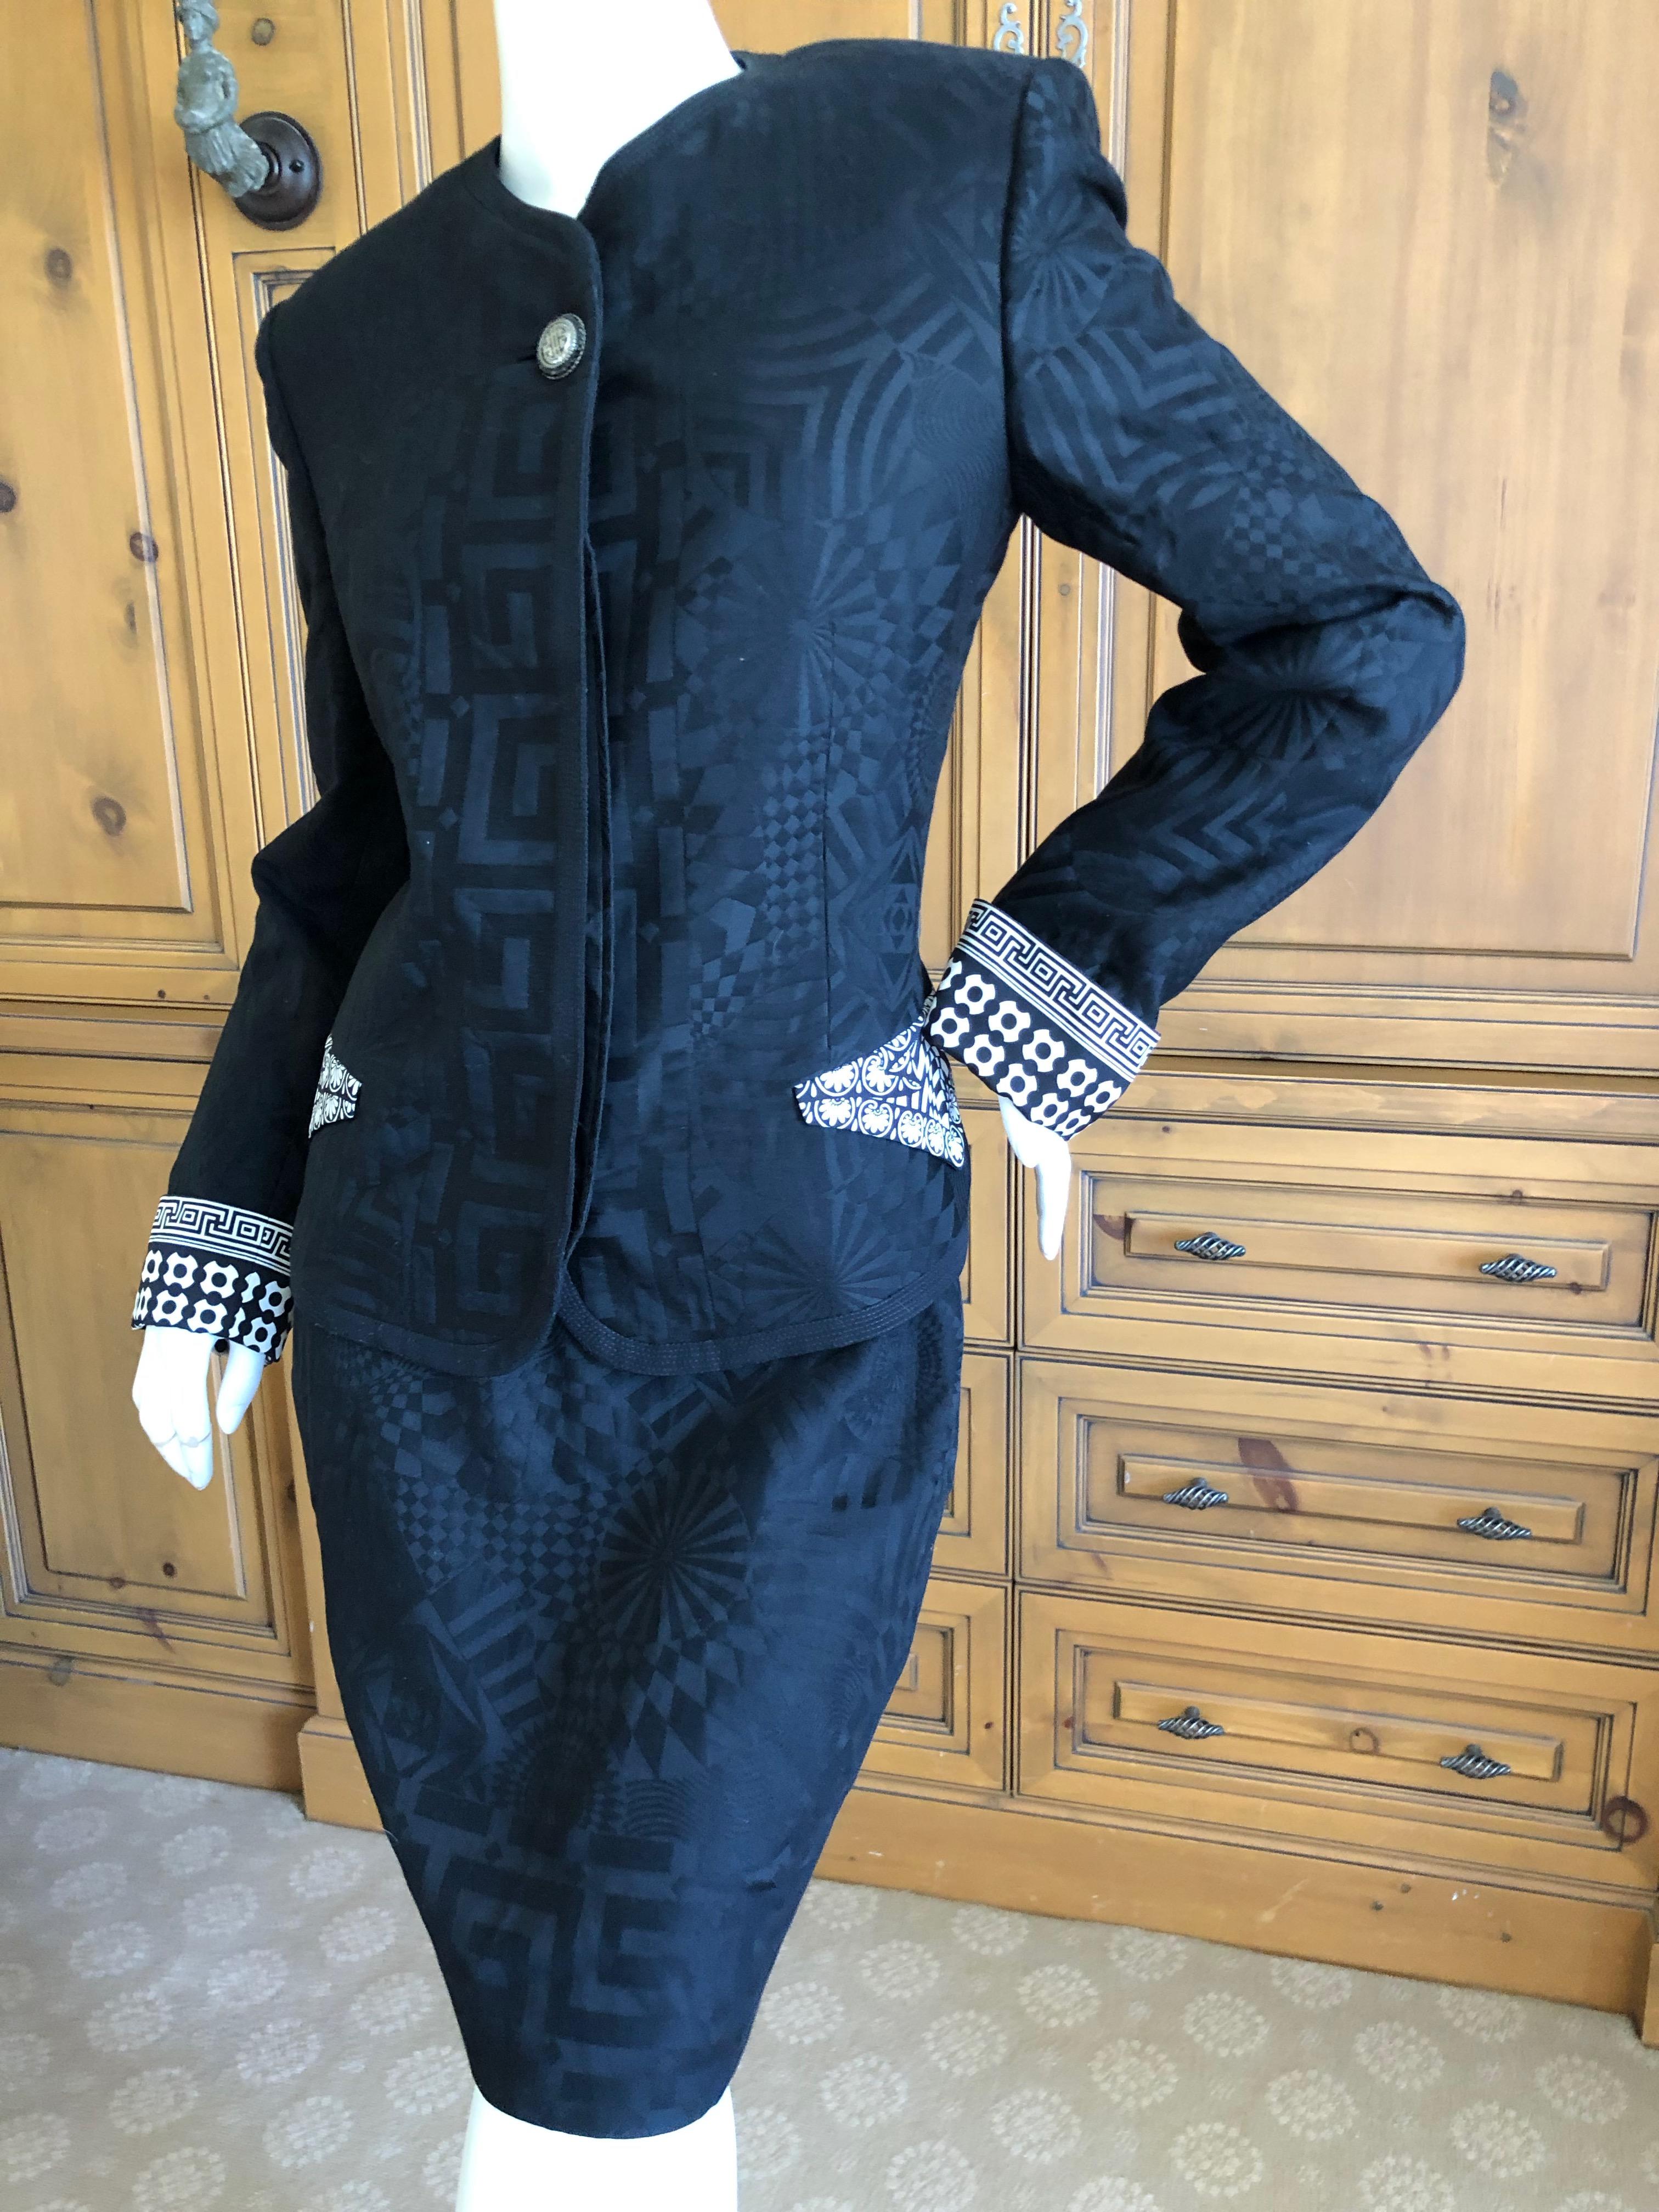 Gianni Versace Couture Fall 1990 Op Art Pattern Cotton Silk Blend Suit In Excellent Condition For Sale In Cloverdale, CA